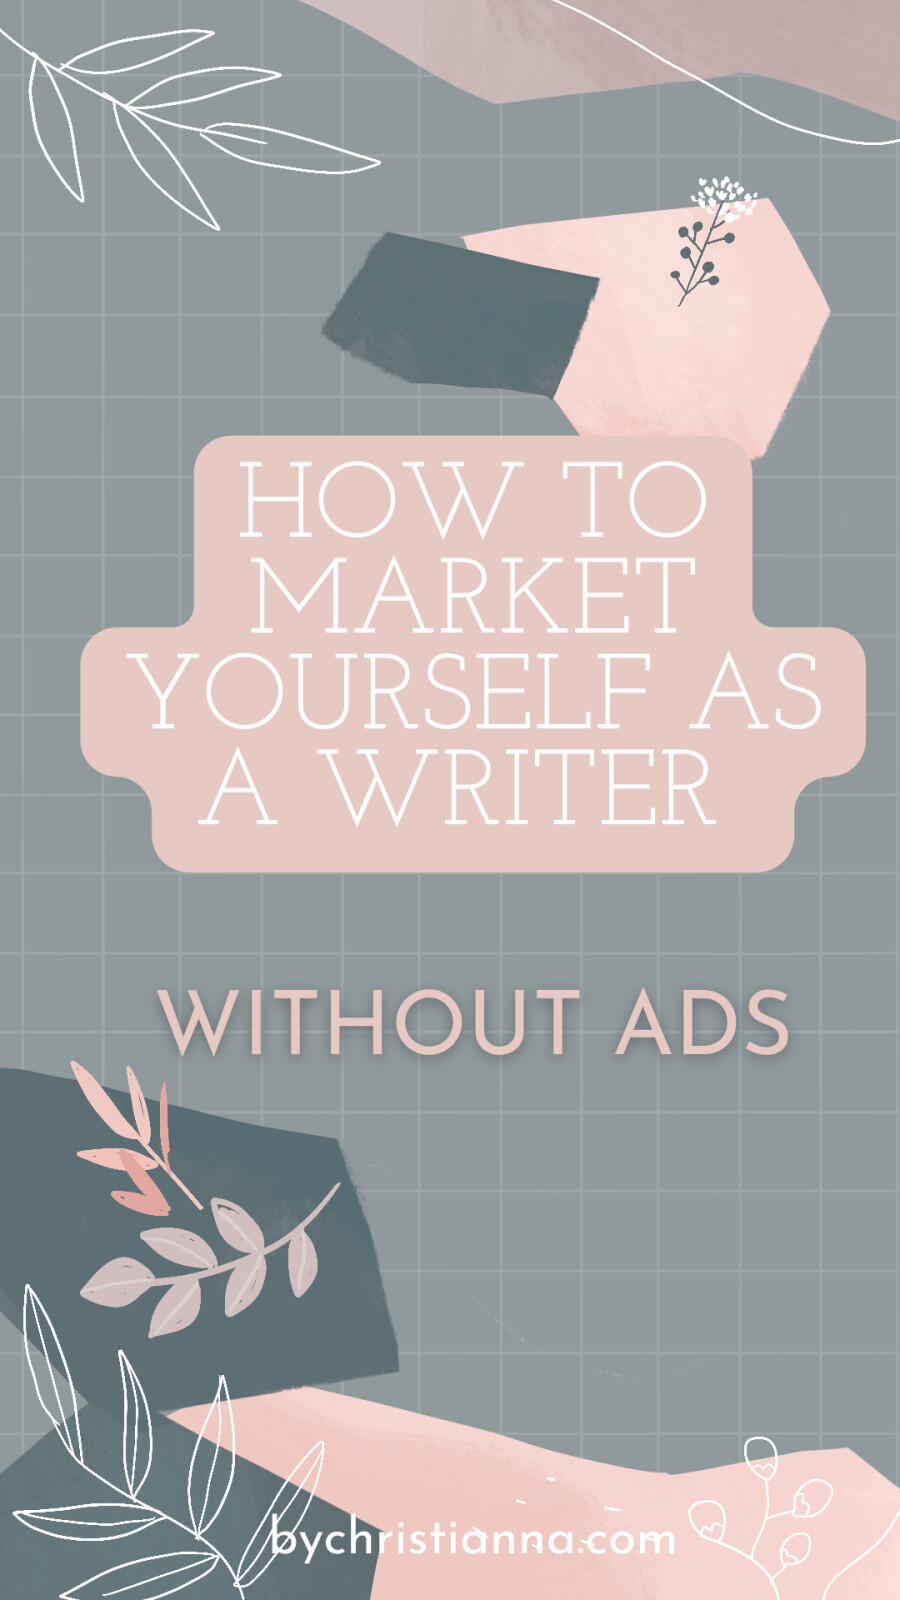 How to Market Yourself as a Writer without Ads